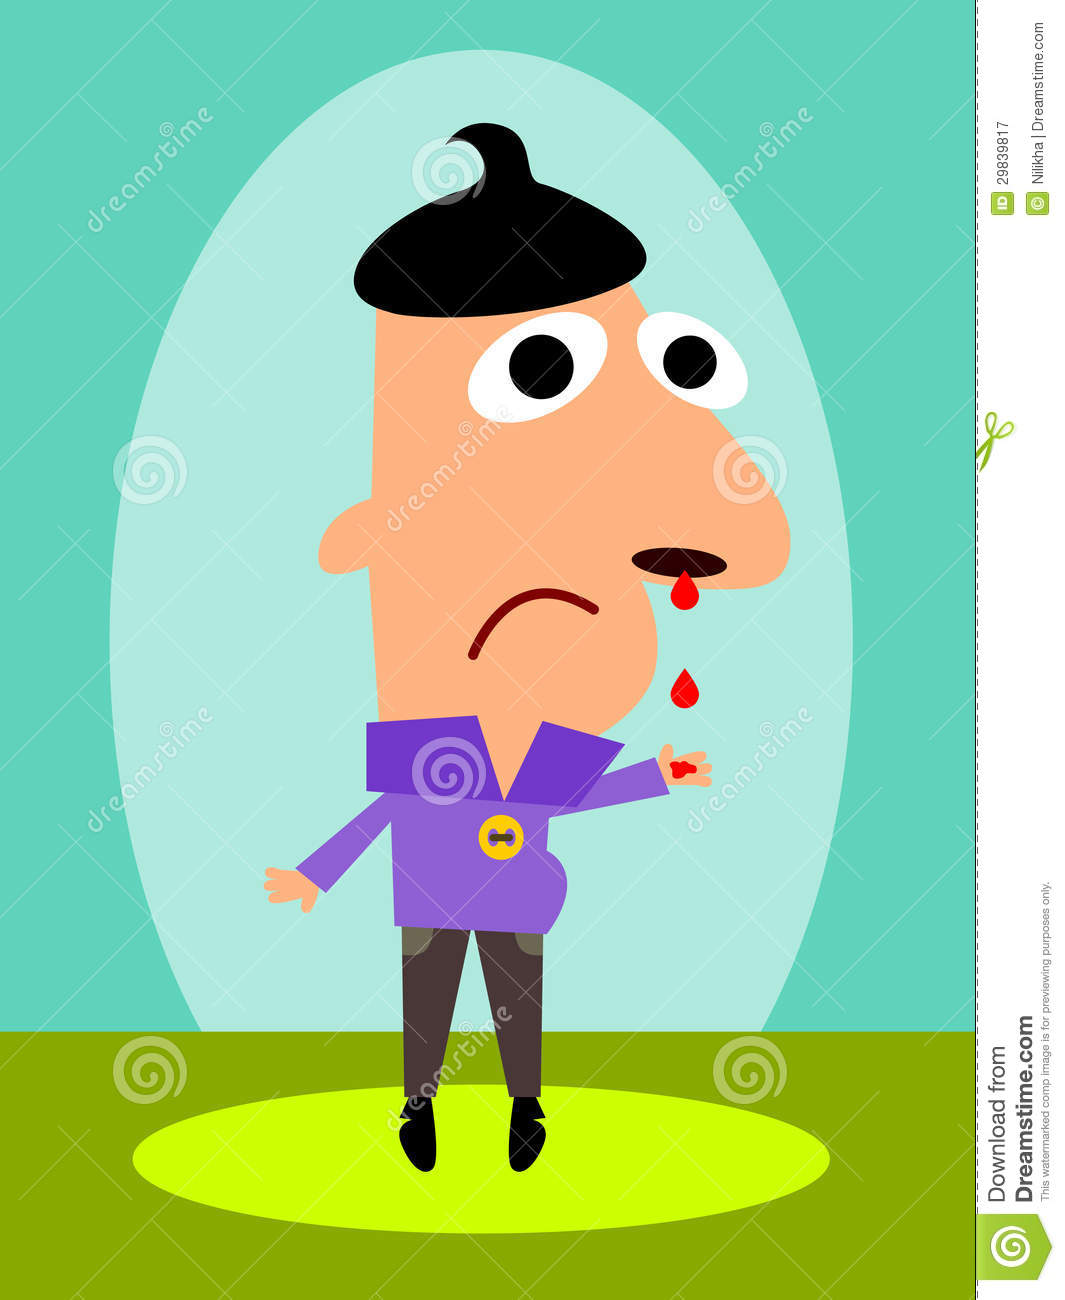 Cartoon Illustration Of A Sad Looking Man With A Bleeding Nose